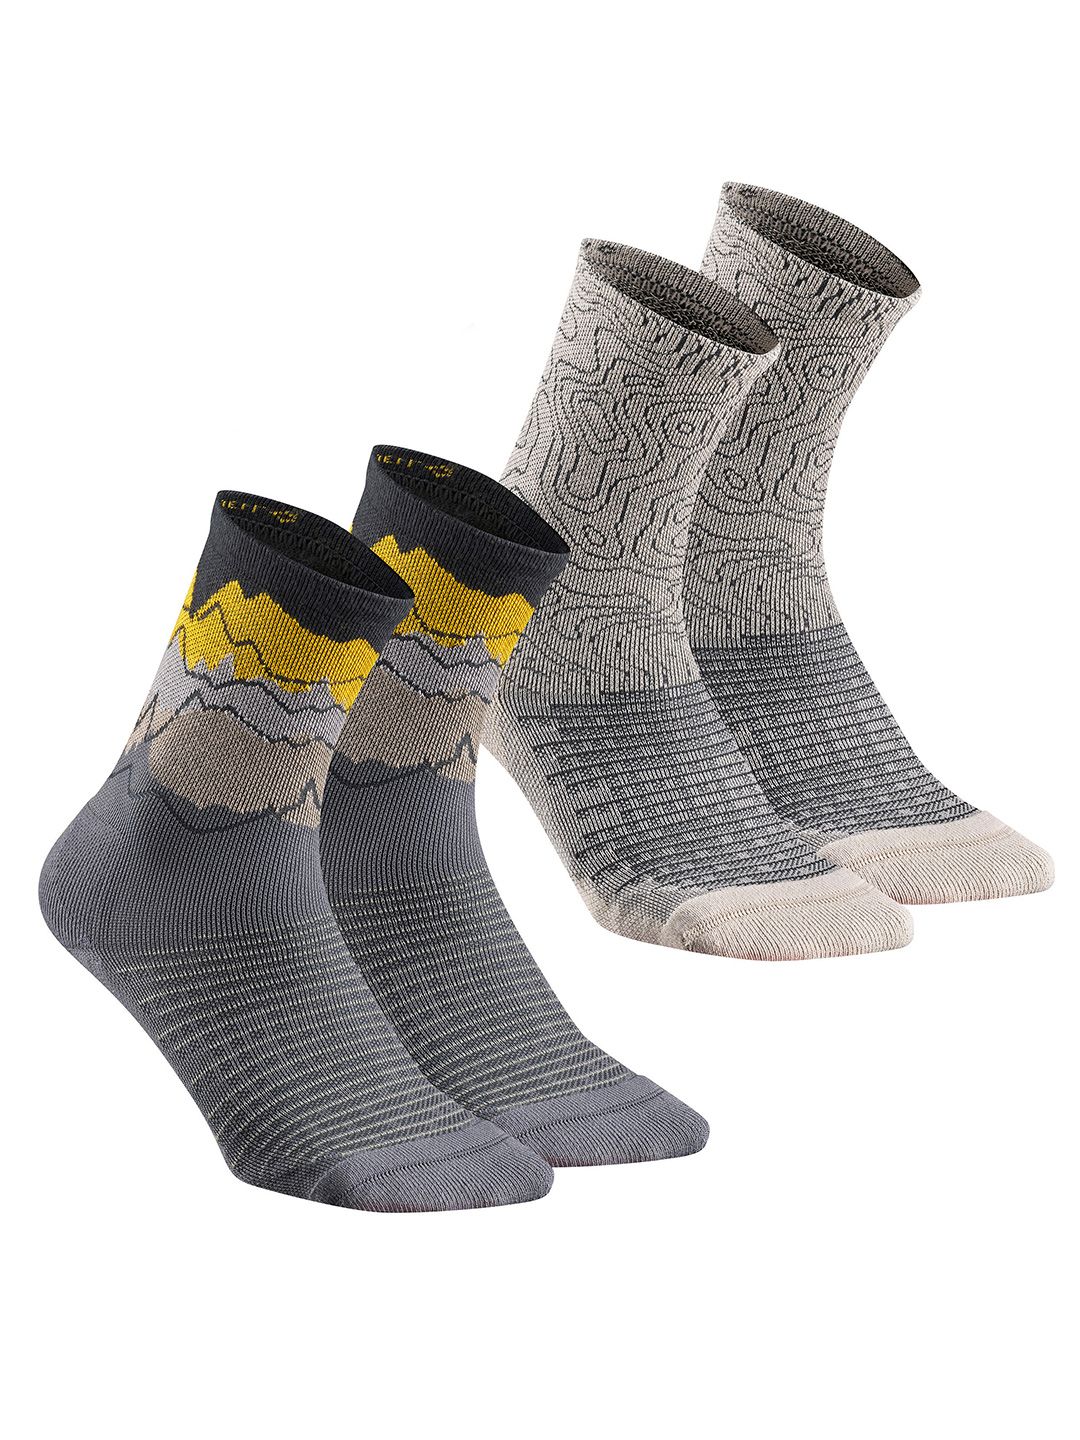 Quechua By Decathlon Unisex Pack Of 2 Patterned Limited Edition High Mountain Socks Price in India